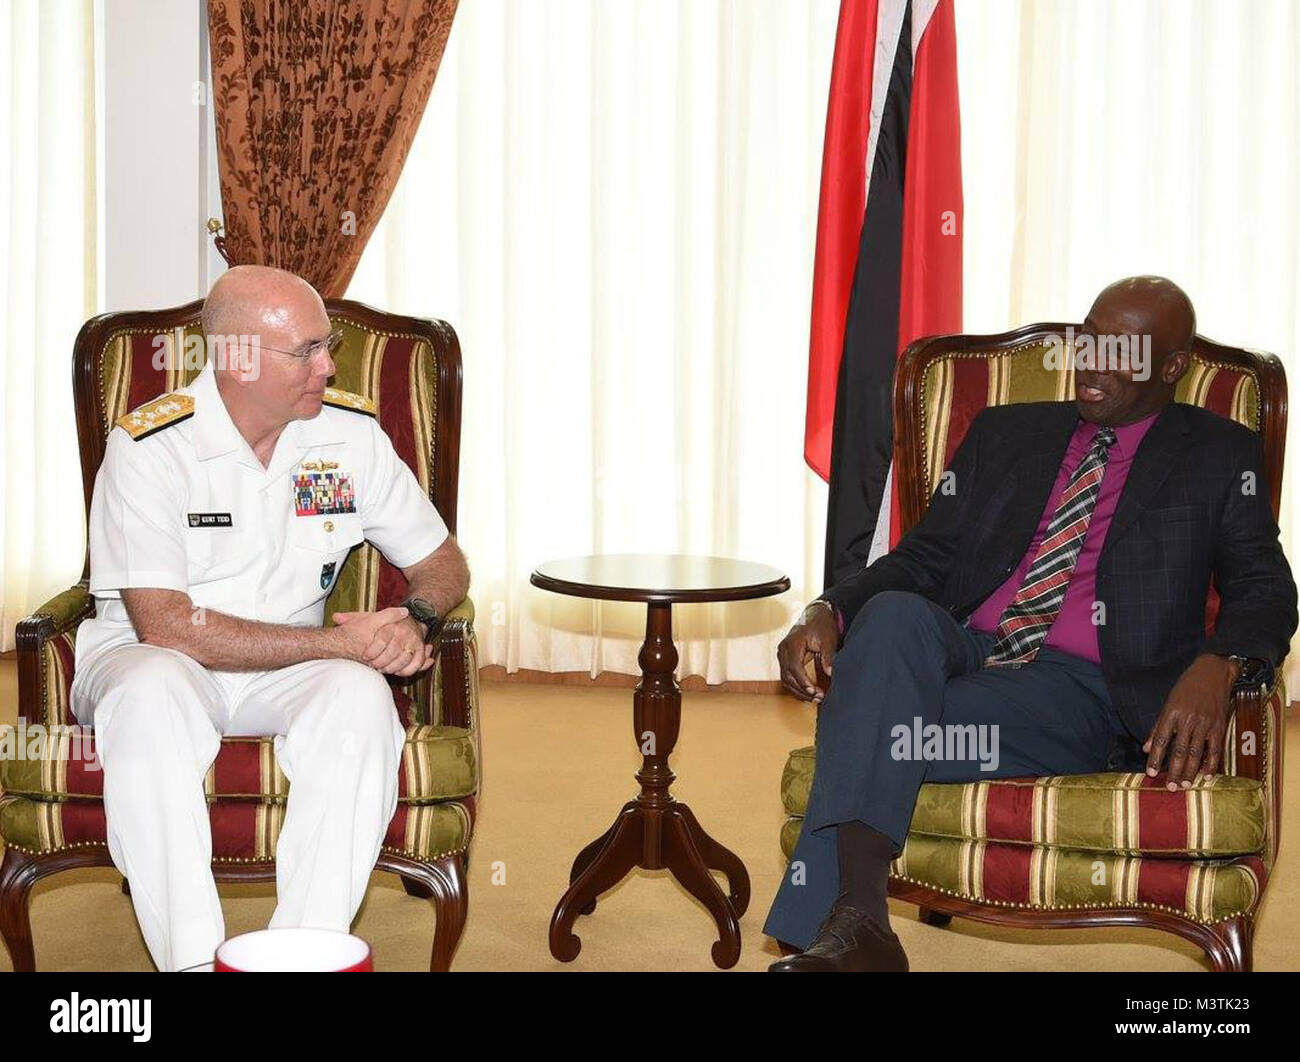 TRINIDAD & TOBAGO (June 15, 2016) -- Navy Adm. Kurt W. Tidd, commander of U.S. Southern Command, meets with Prime Minister Dr. Keith Rowley to discuss security cooperation in taking on transnational threat networks. (Courtesy photo, Office of the Prime Minister of Trinidad and Tobago) 160615-D-BS728-311 by ussouthcom Stock Photo